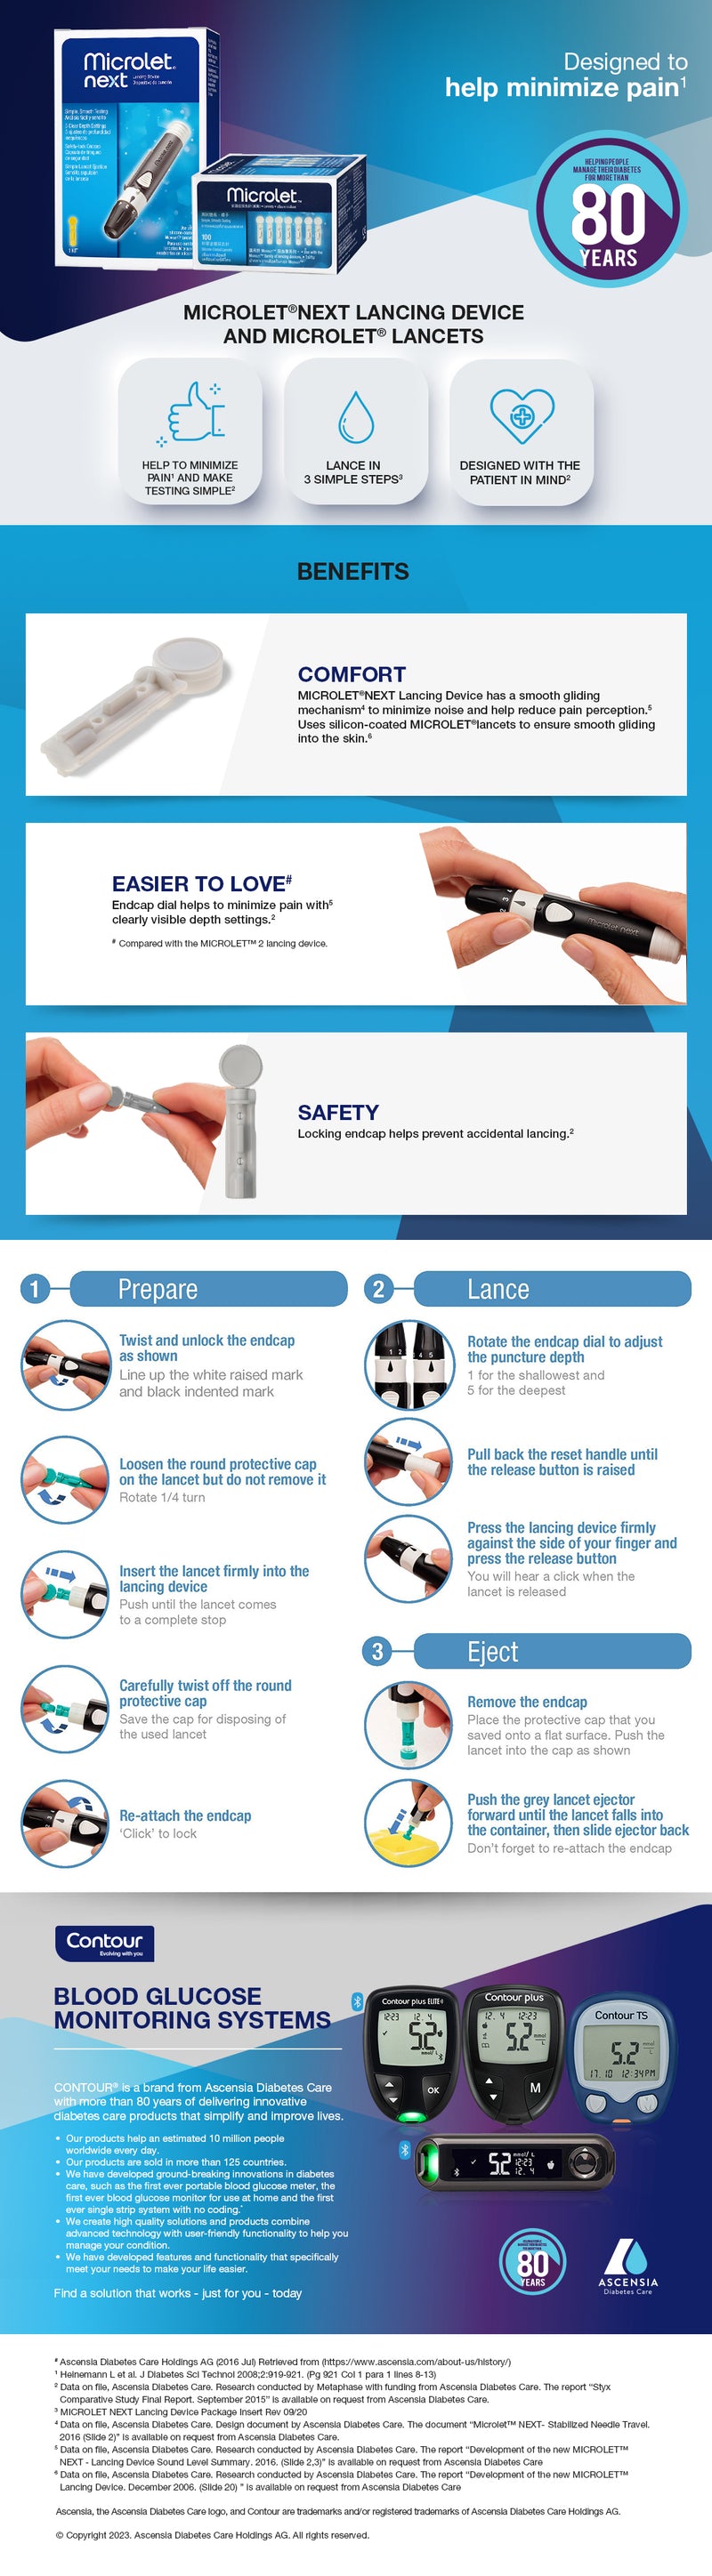 MICROLET®NEXT Self Monitoring Blood Glucose Test Lancing Device [HK Label Authentic Product]